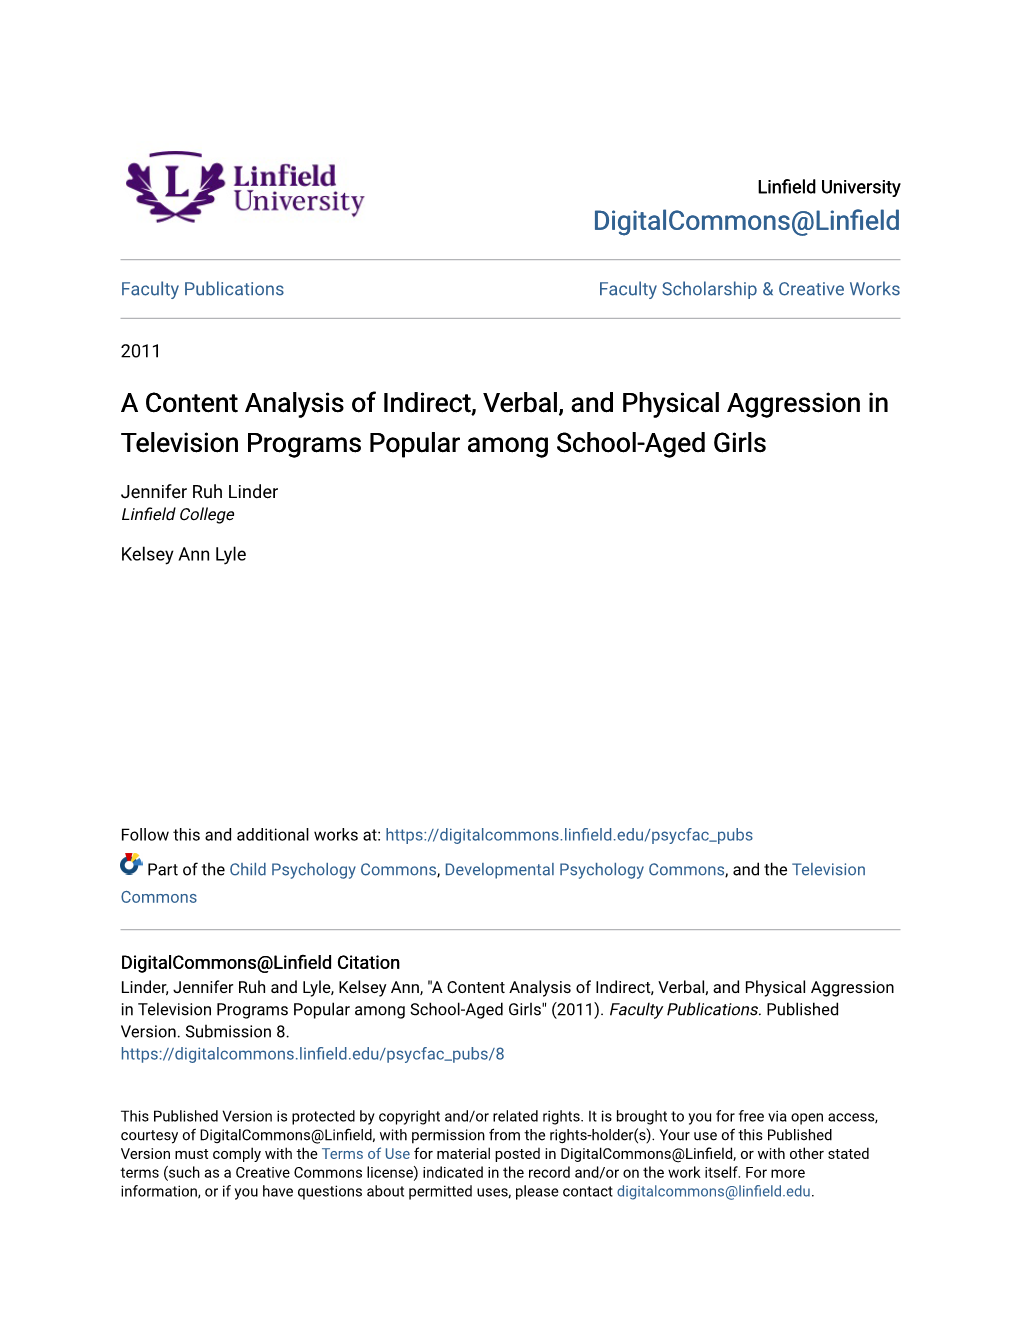 A Content Analysis of Indirect, Verbal, and Physical Aggression in Television Programs Popular Among School-Aged Girls